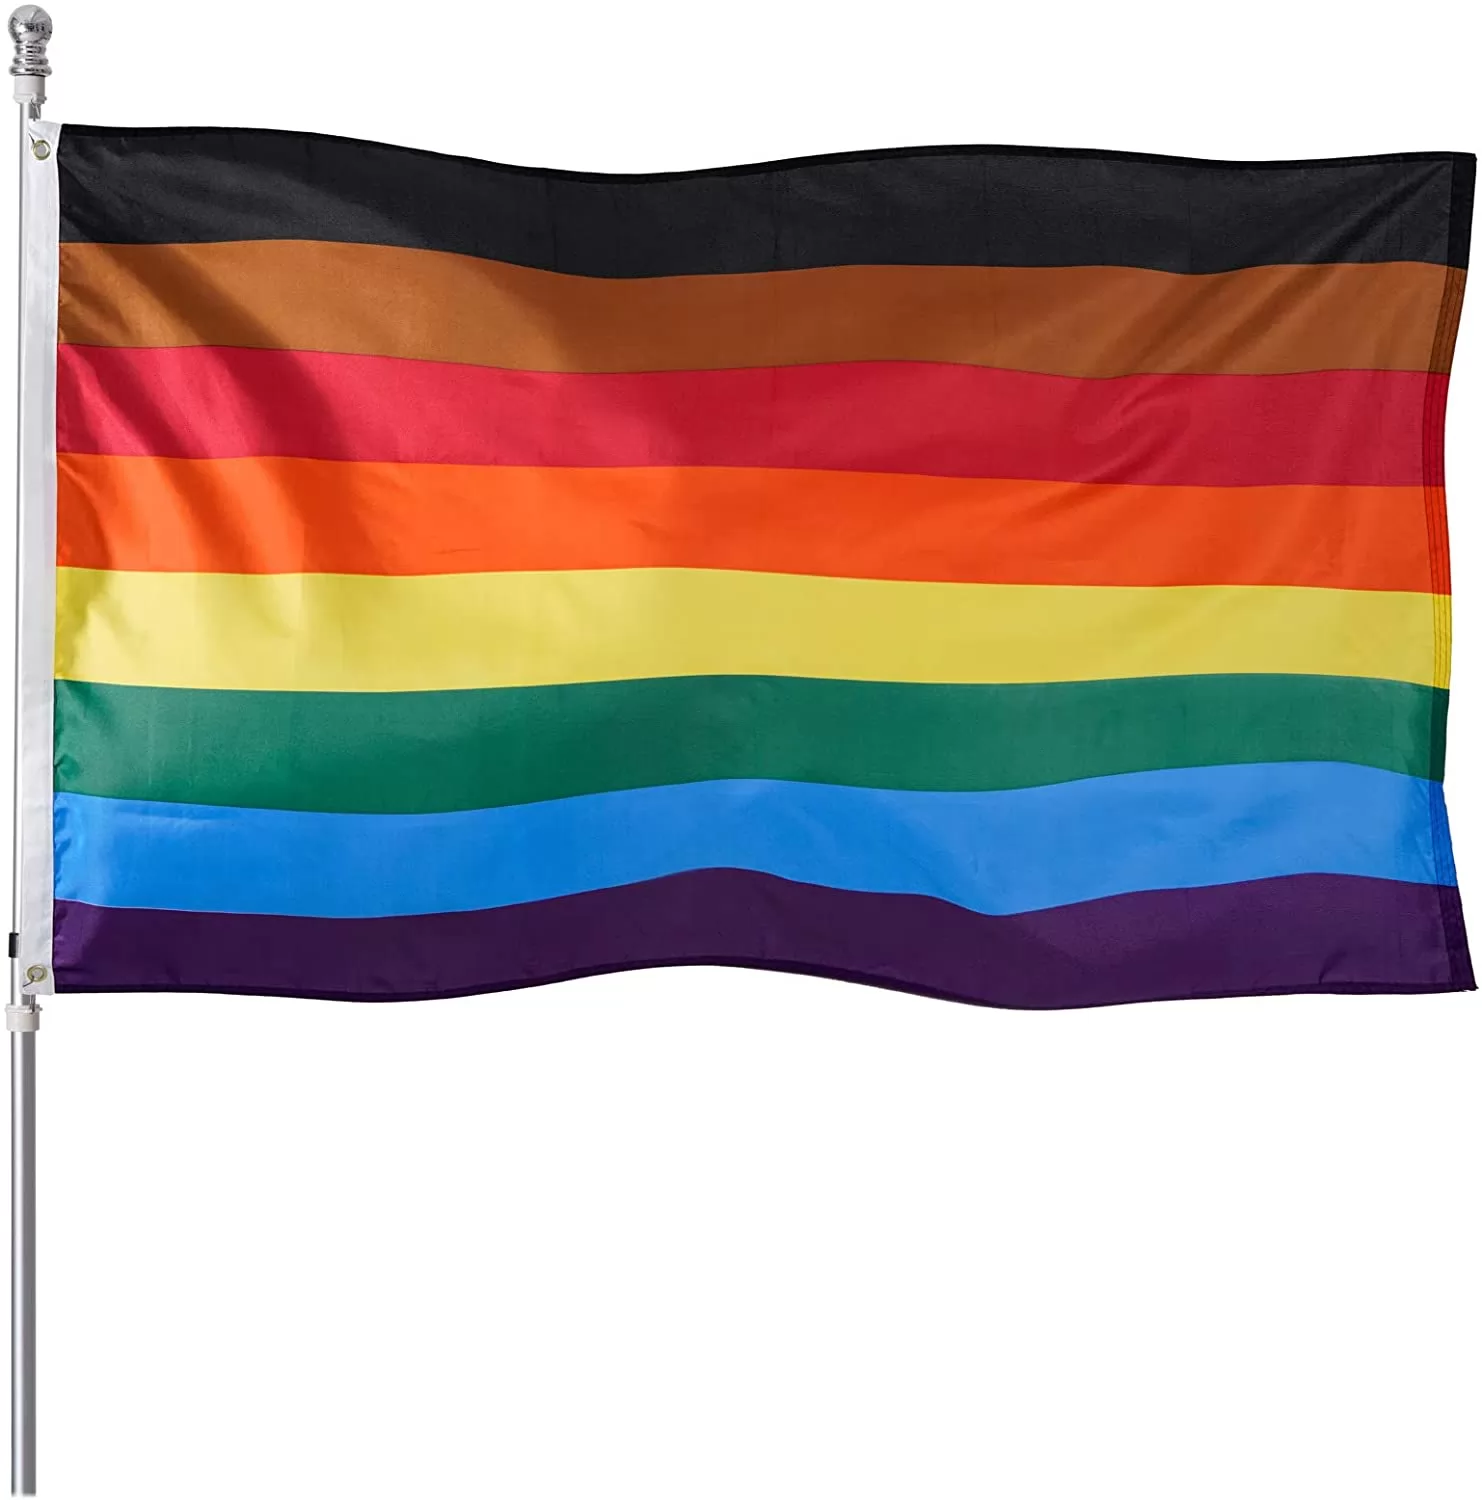 Homissor Philadelphia Philly Rainbow Pride Flag 3x5 Heavy Duty Polyester LGBTQ Brown and Black Pride Flags for Outdoor Wall with Brass Grommets & Dura